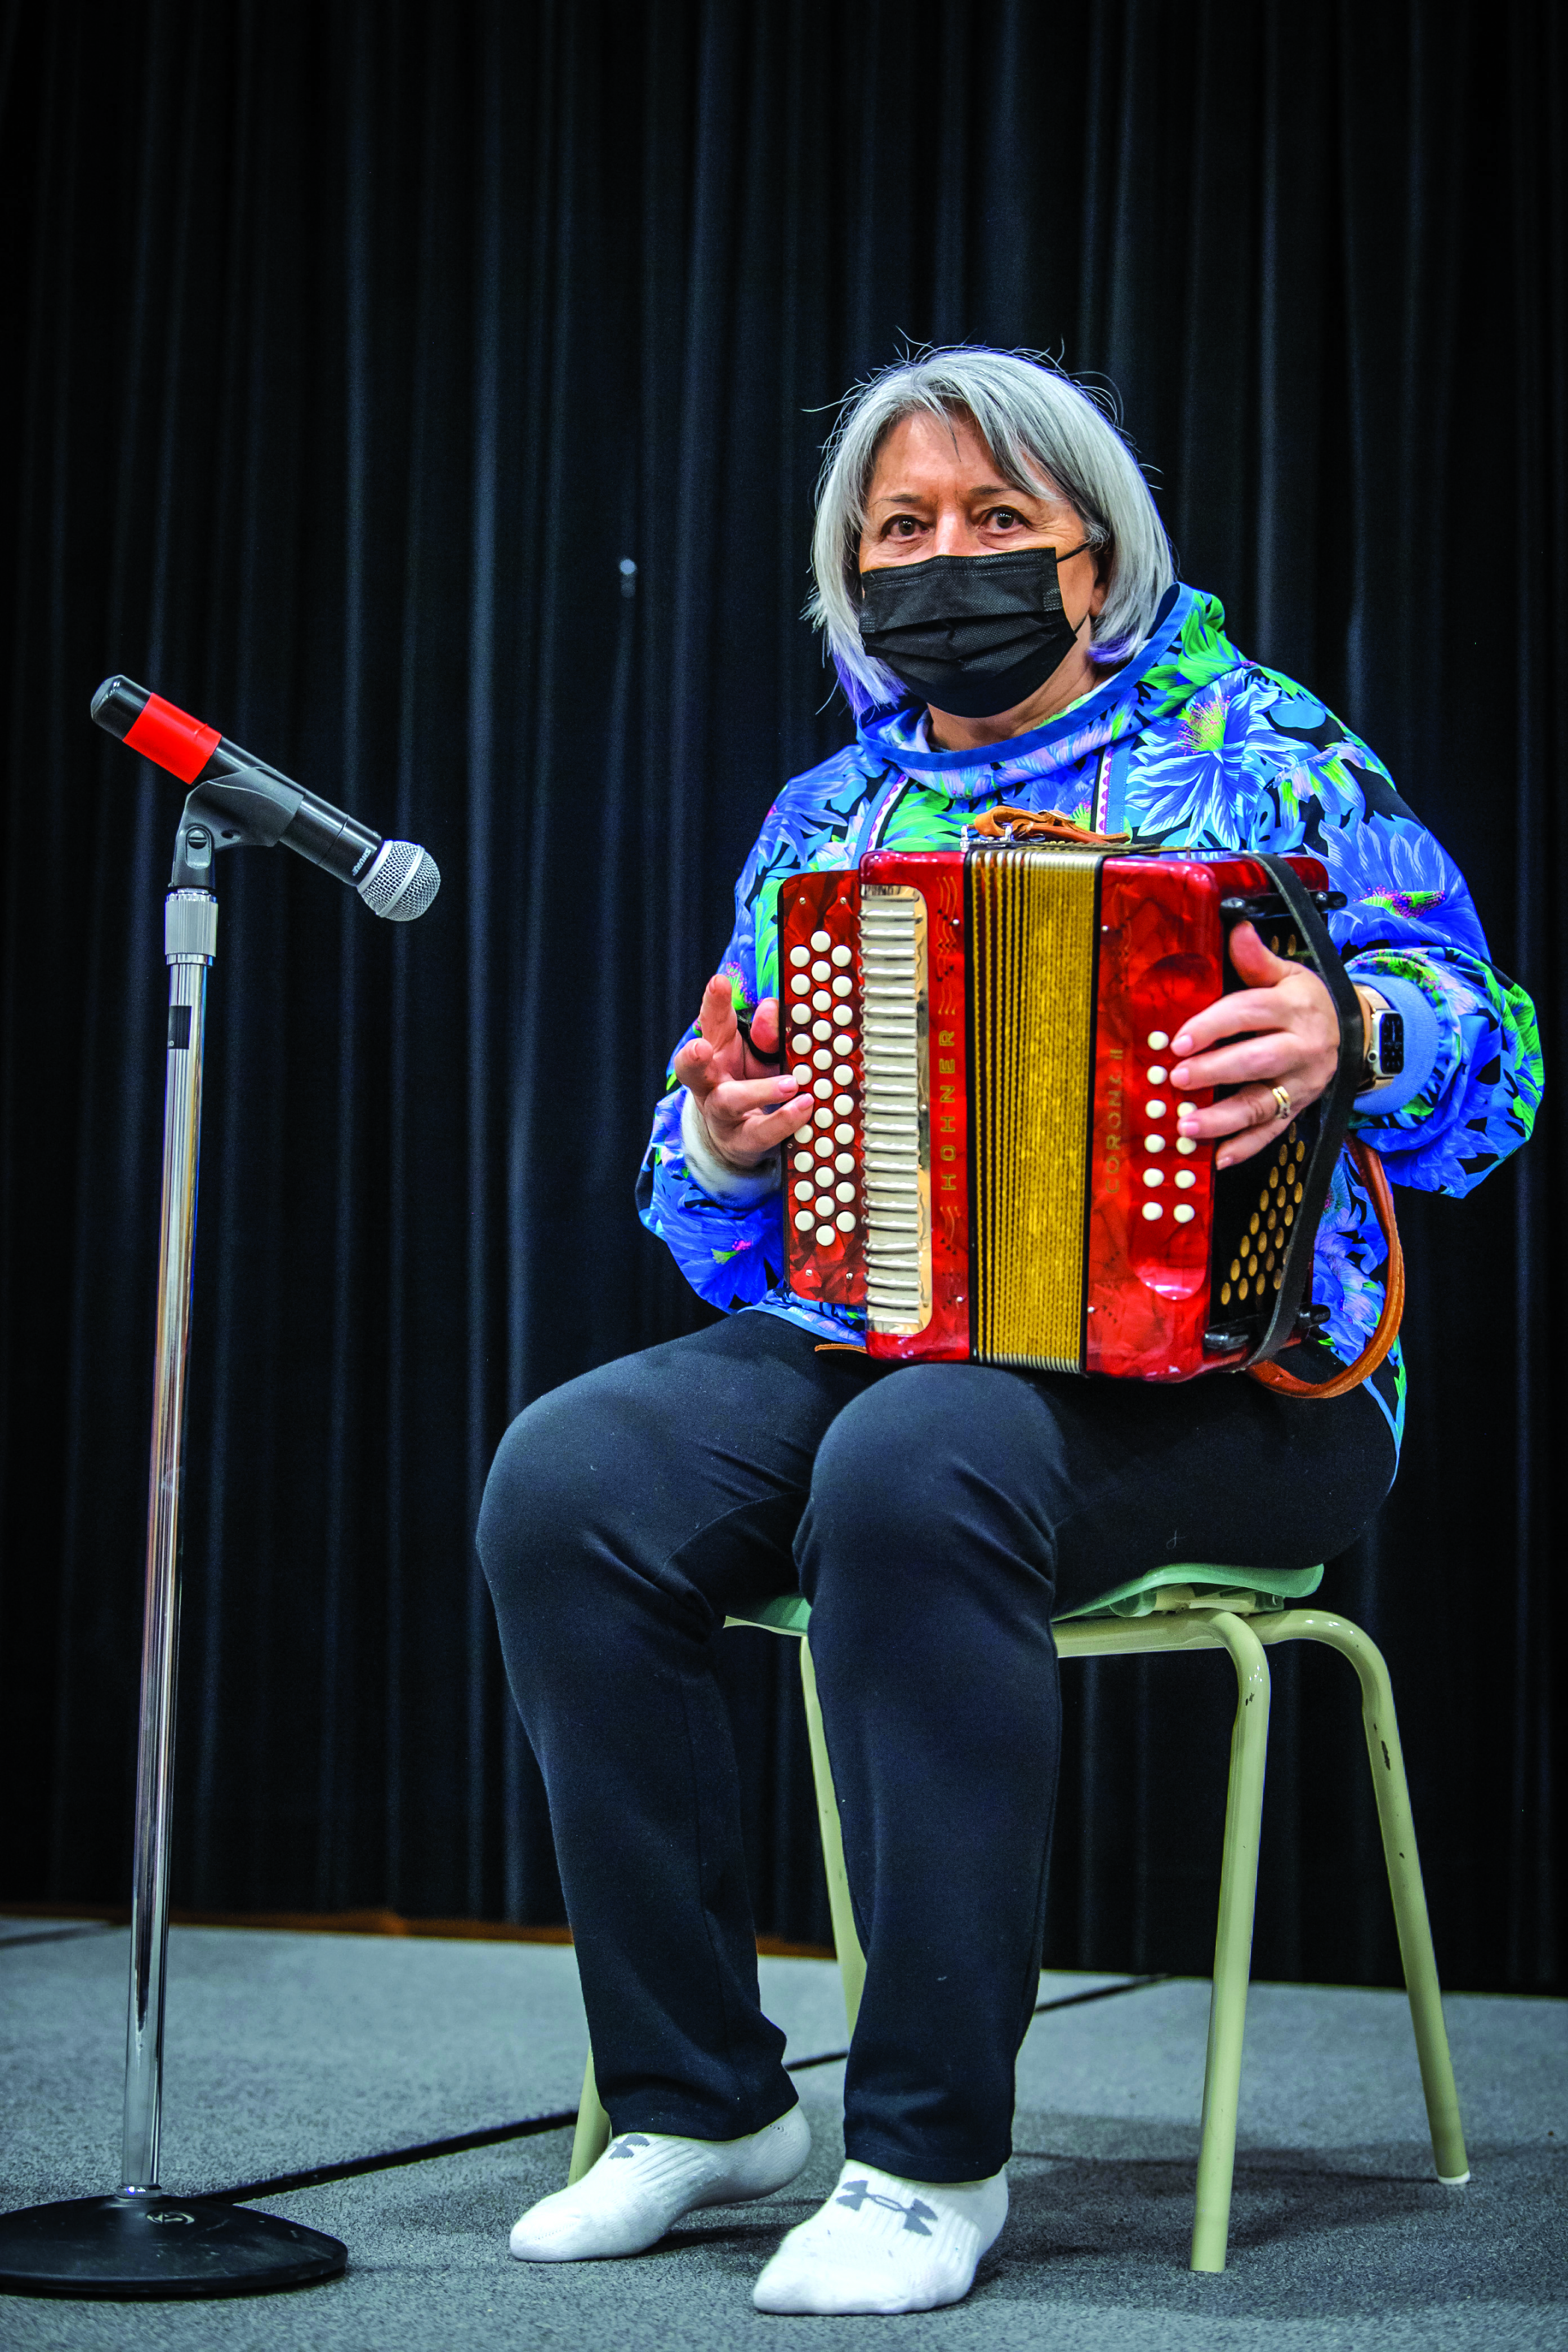 At a community gathering in Kangiqsualujjuaq, her birthplace, in May 2022. (Photo by Sgt. Mathieu St-Amour/Rideau Hall)